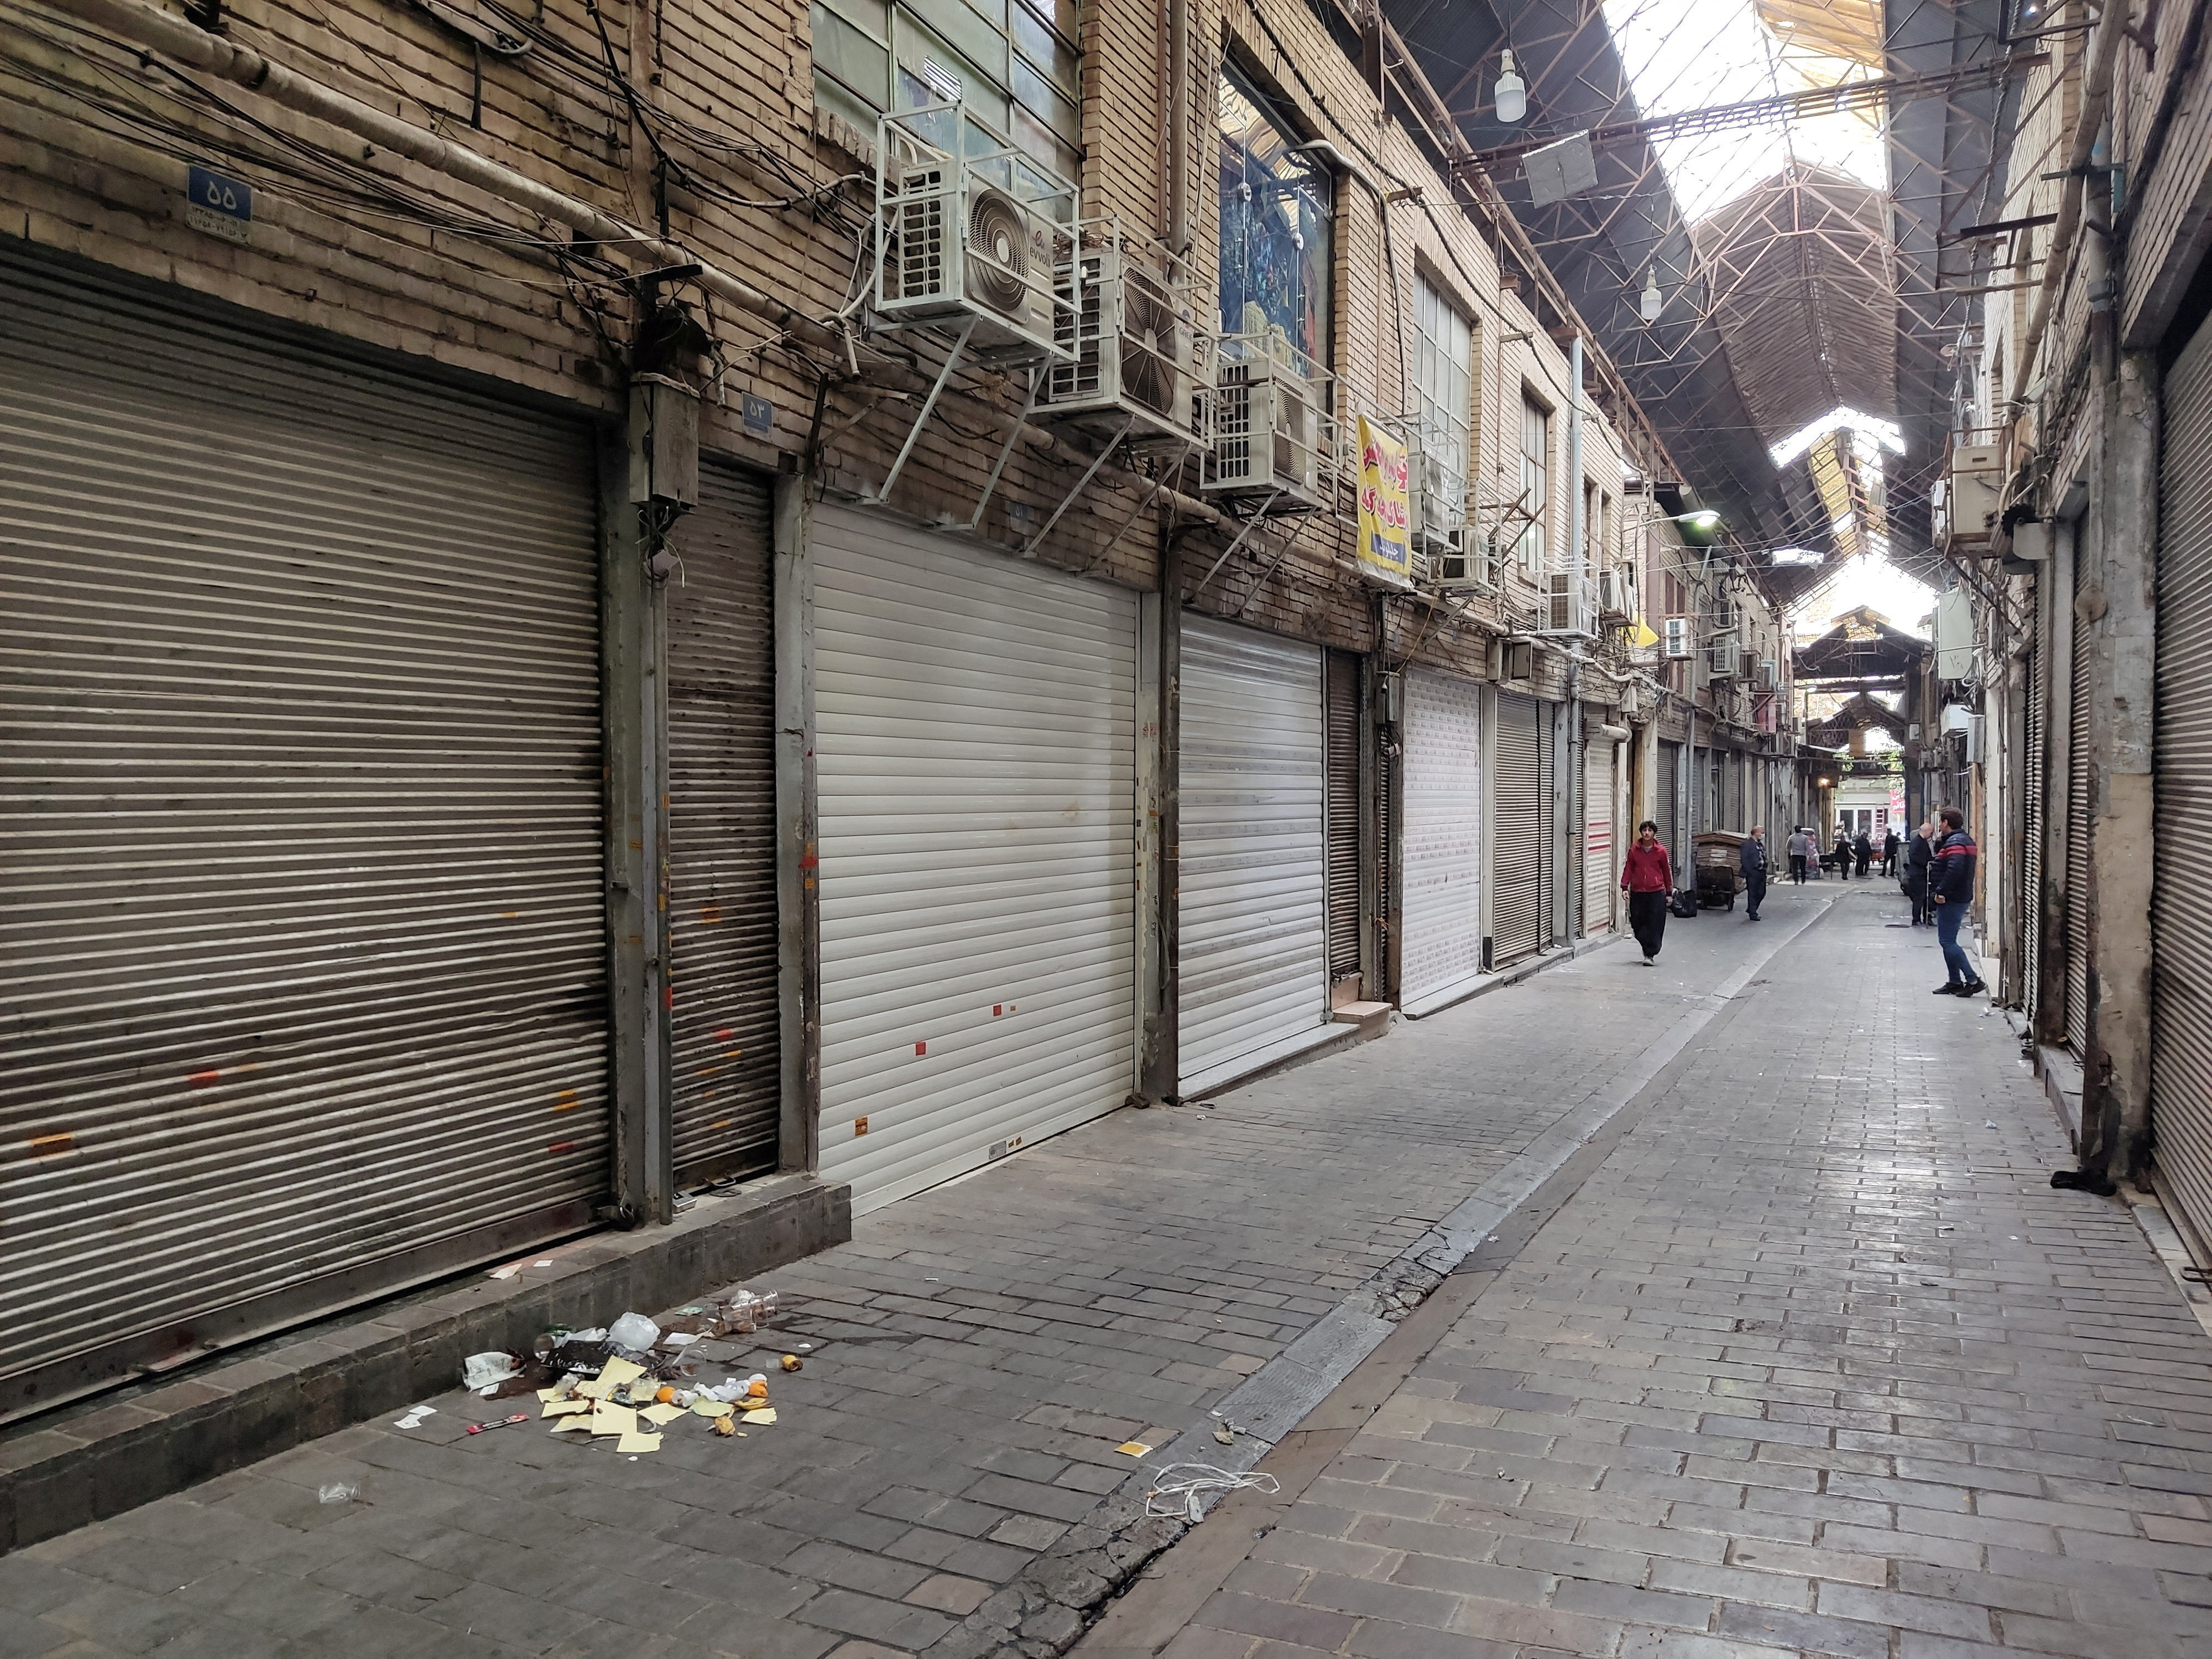 Shops remain closed following recent riots in Tehran and calls by protesters to close markets